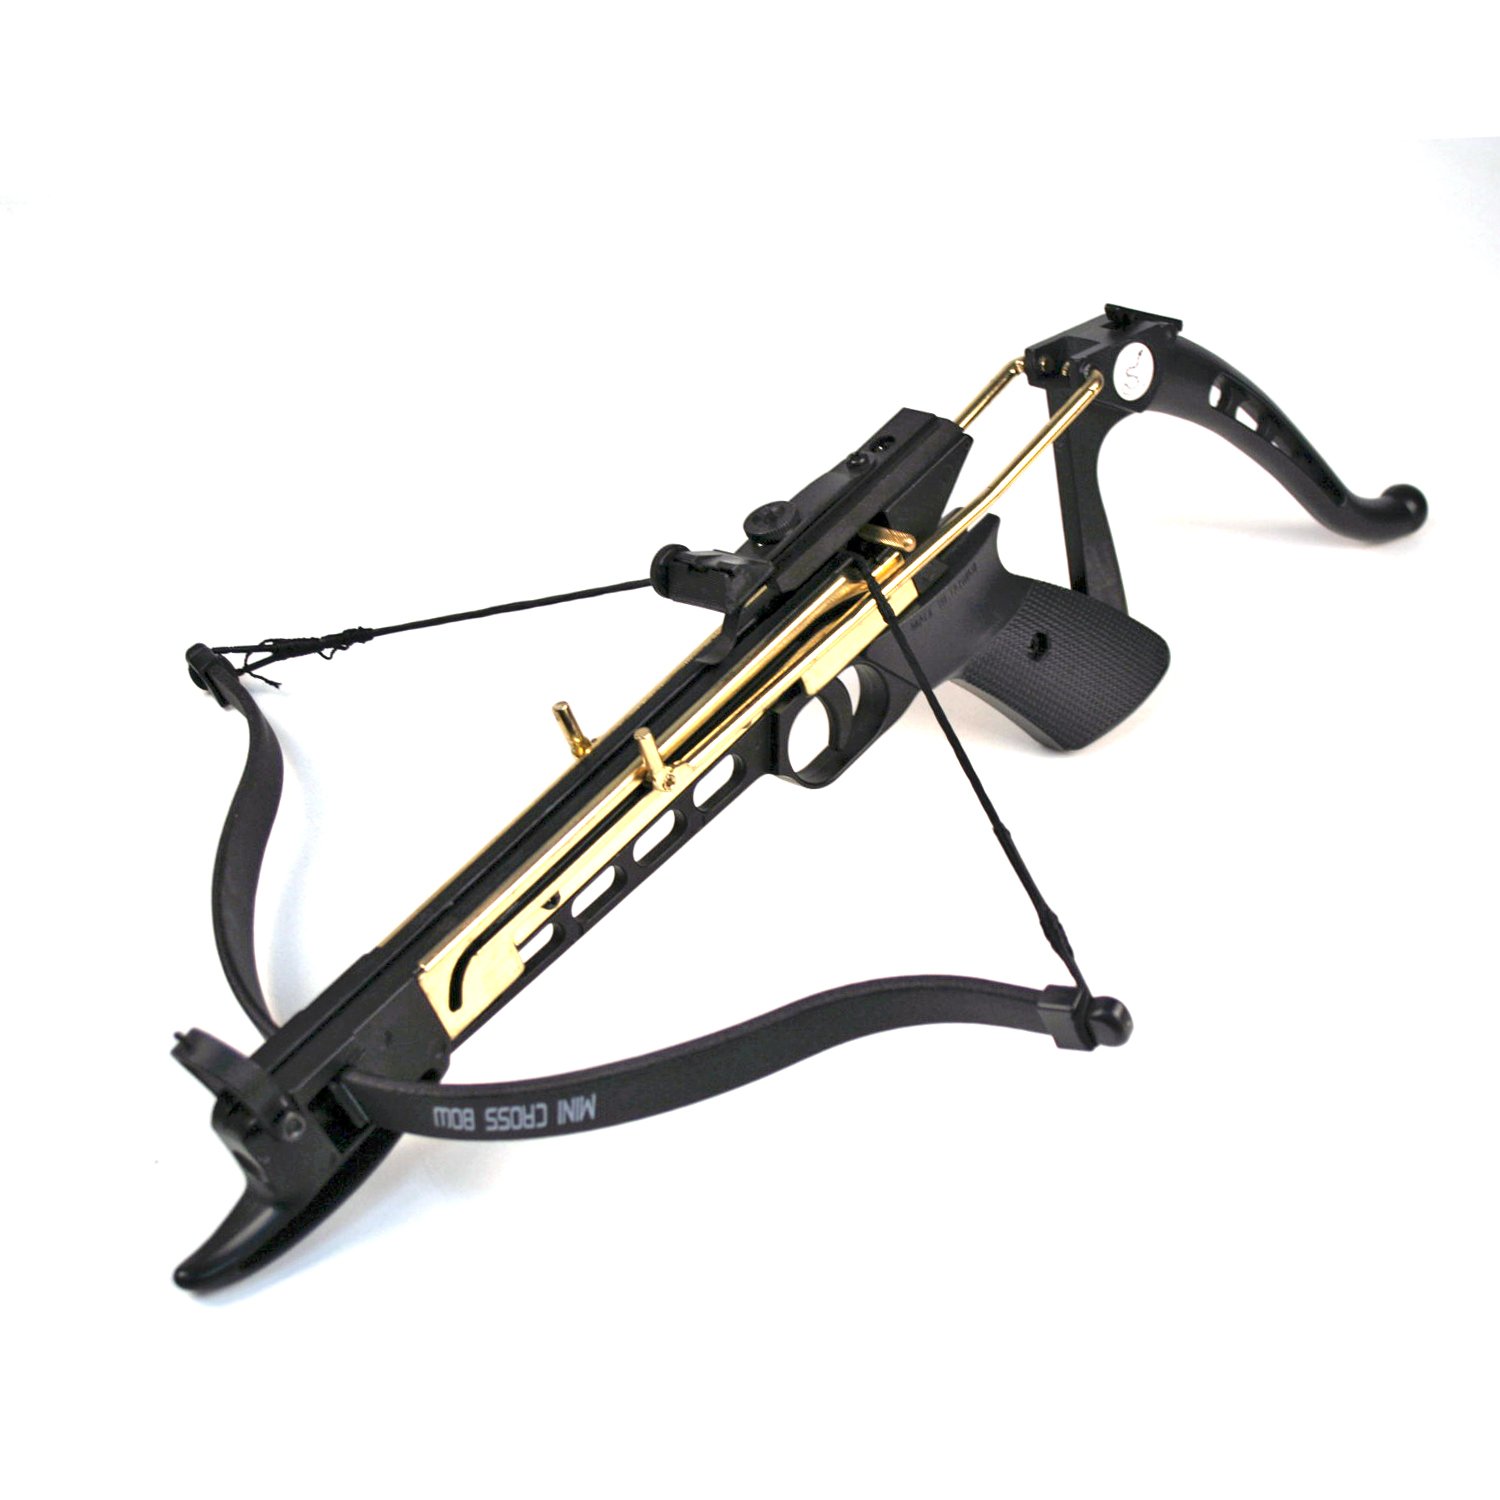 Ace Martial Arts Supply Cobra System Self Cocking Pistol Tactical Crossbow